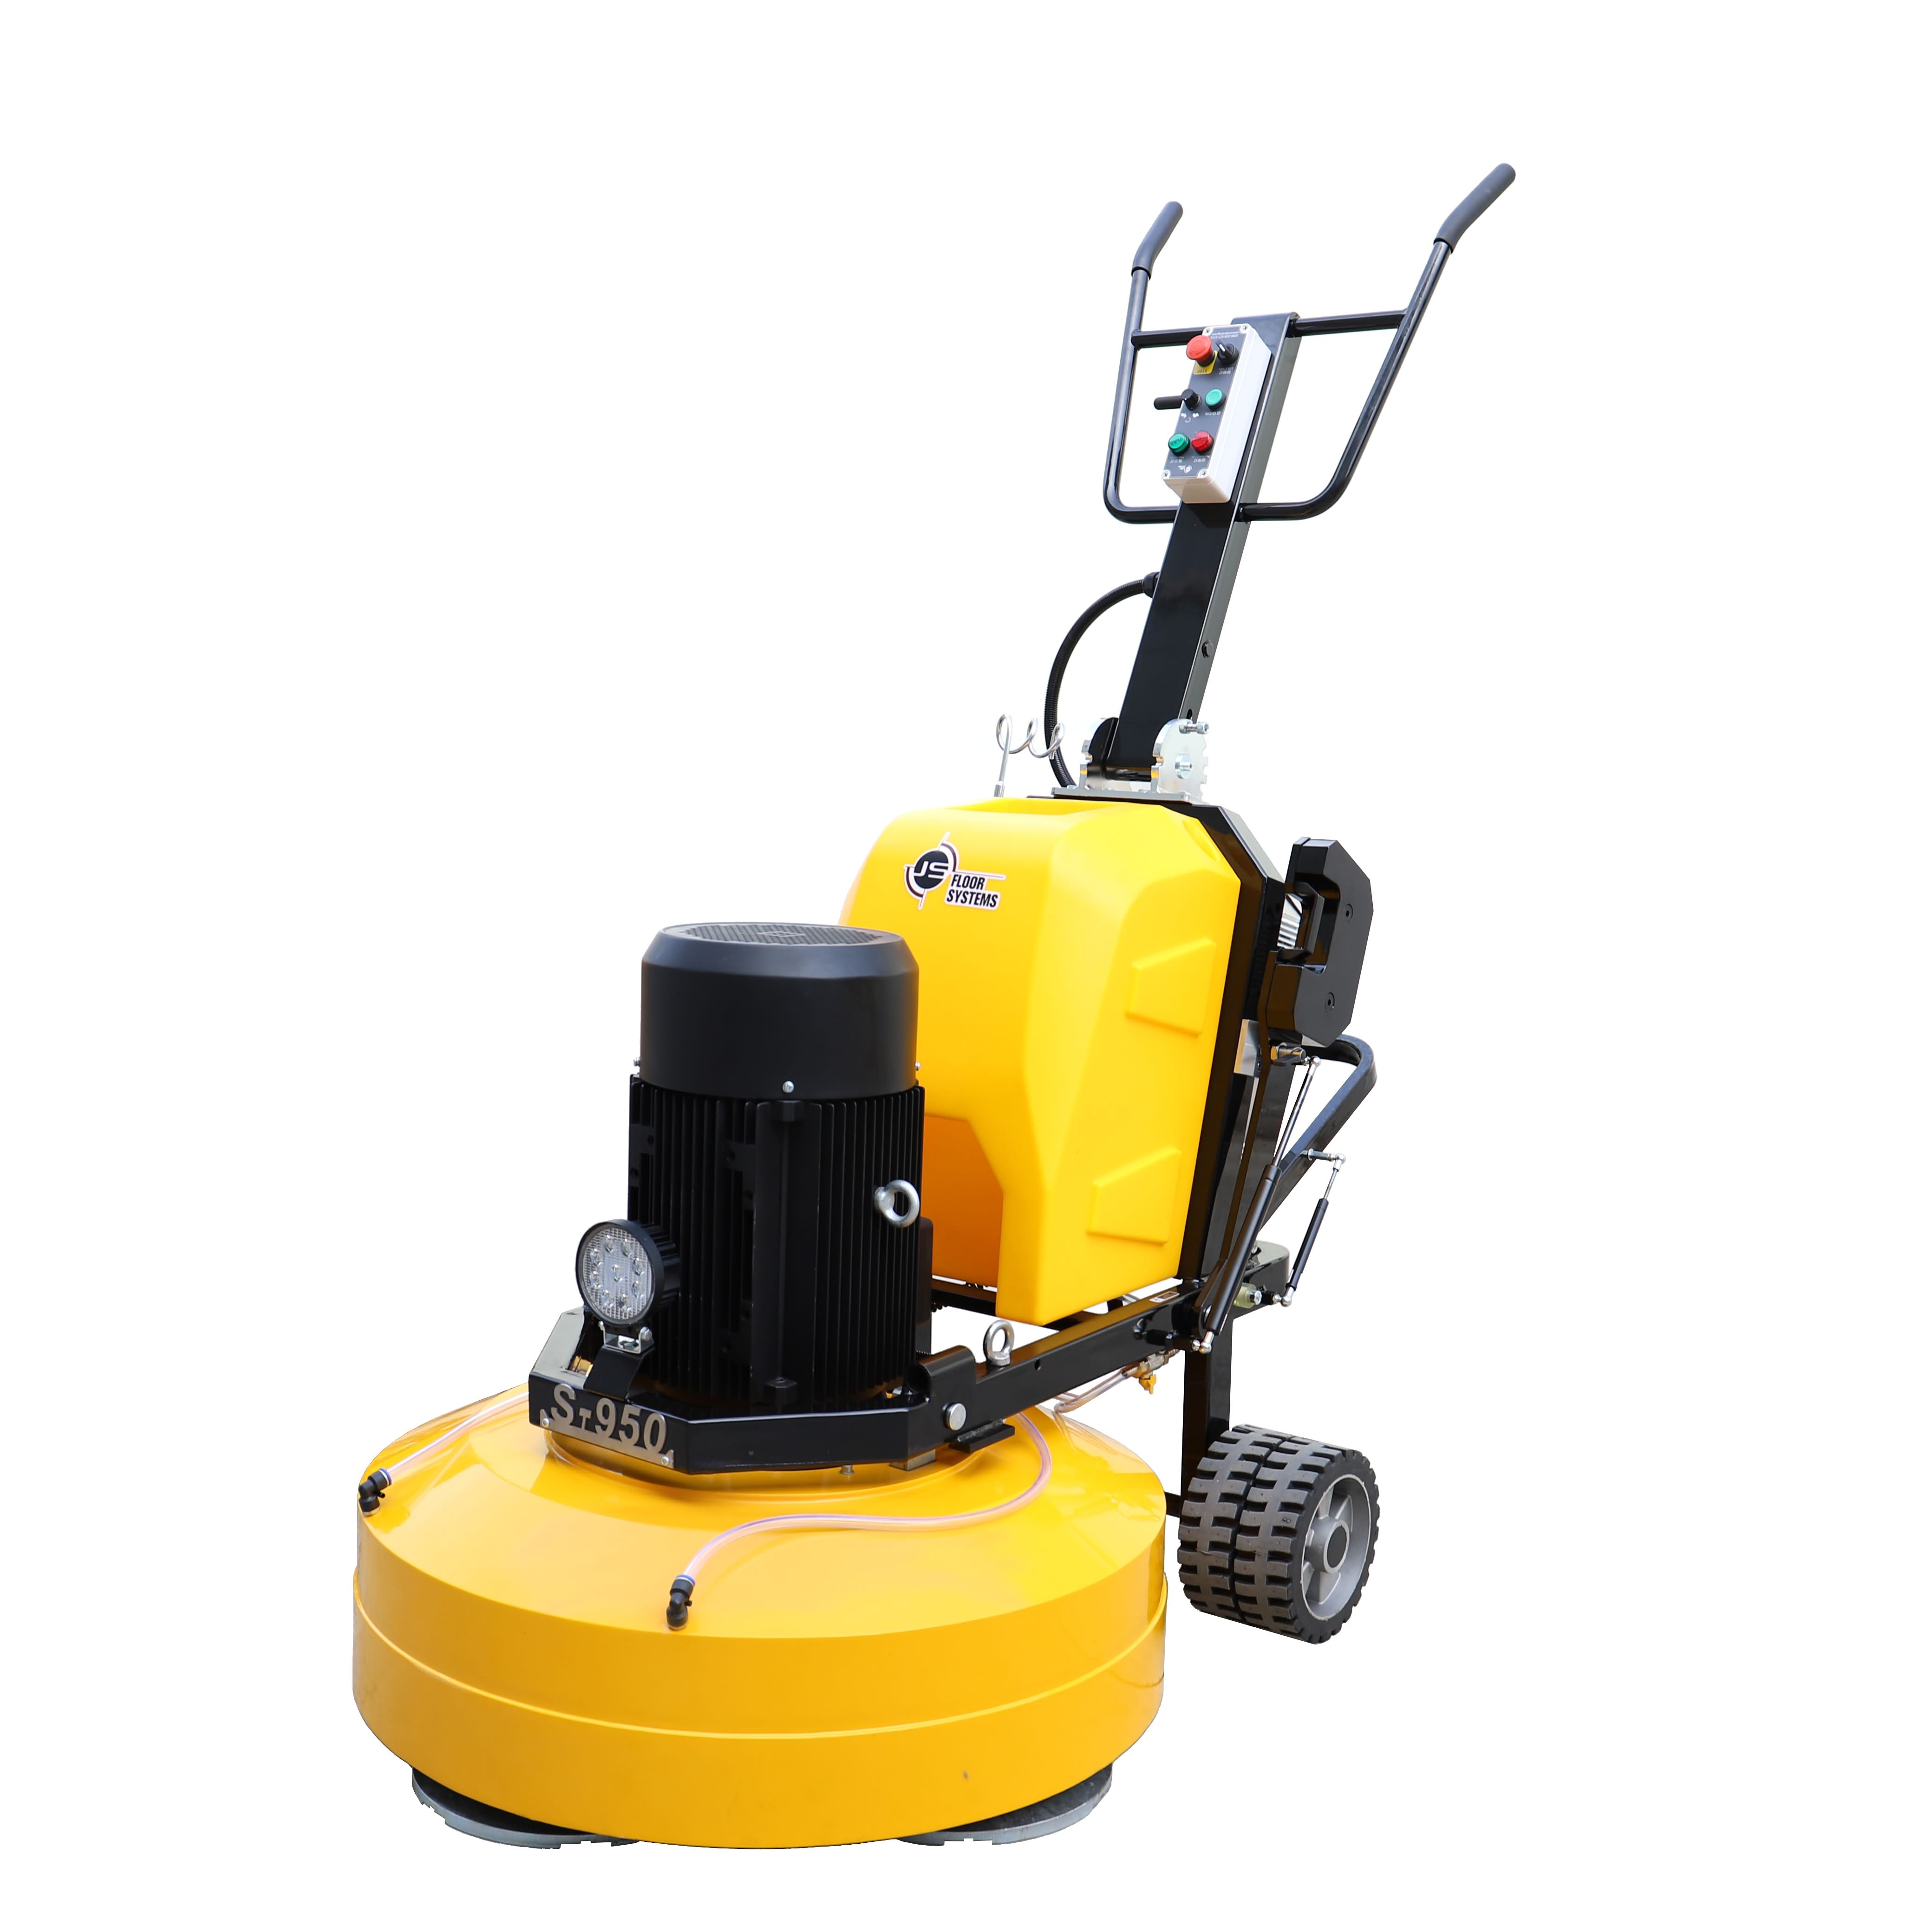 CE Approved Diamond Concrete Floor Grinding Machine Polishing Grinder For Concrete Surface